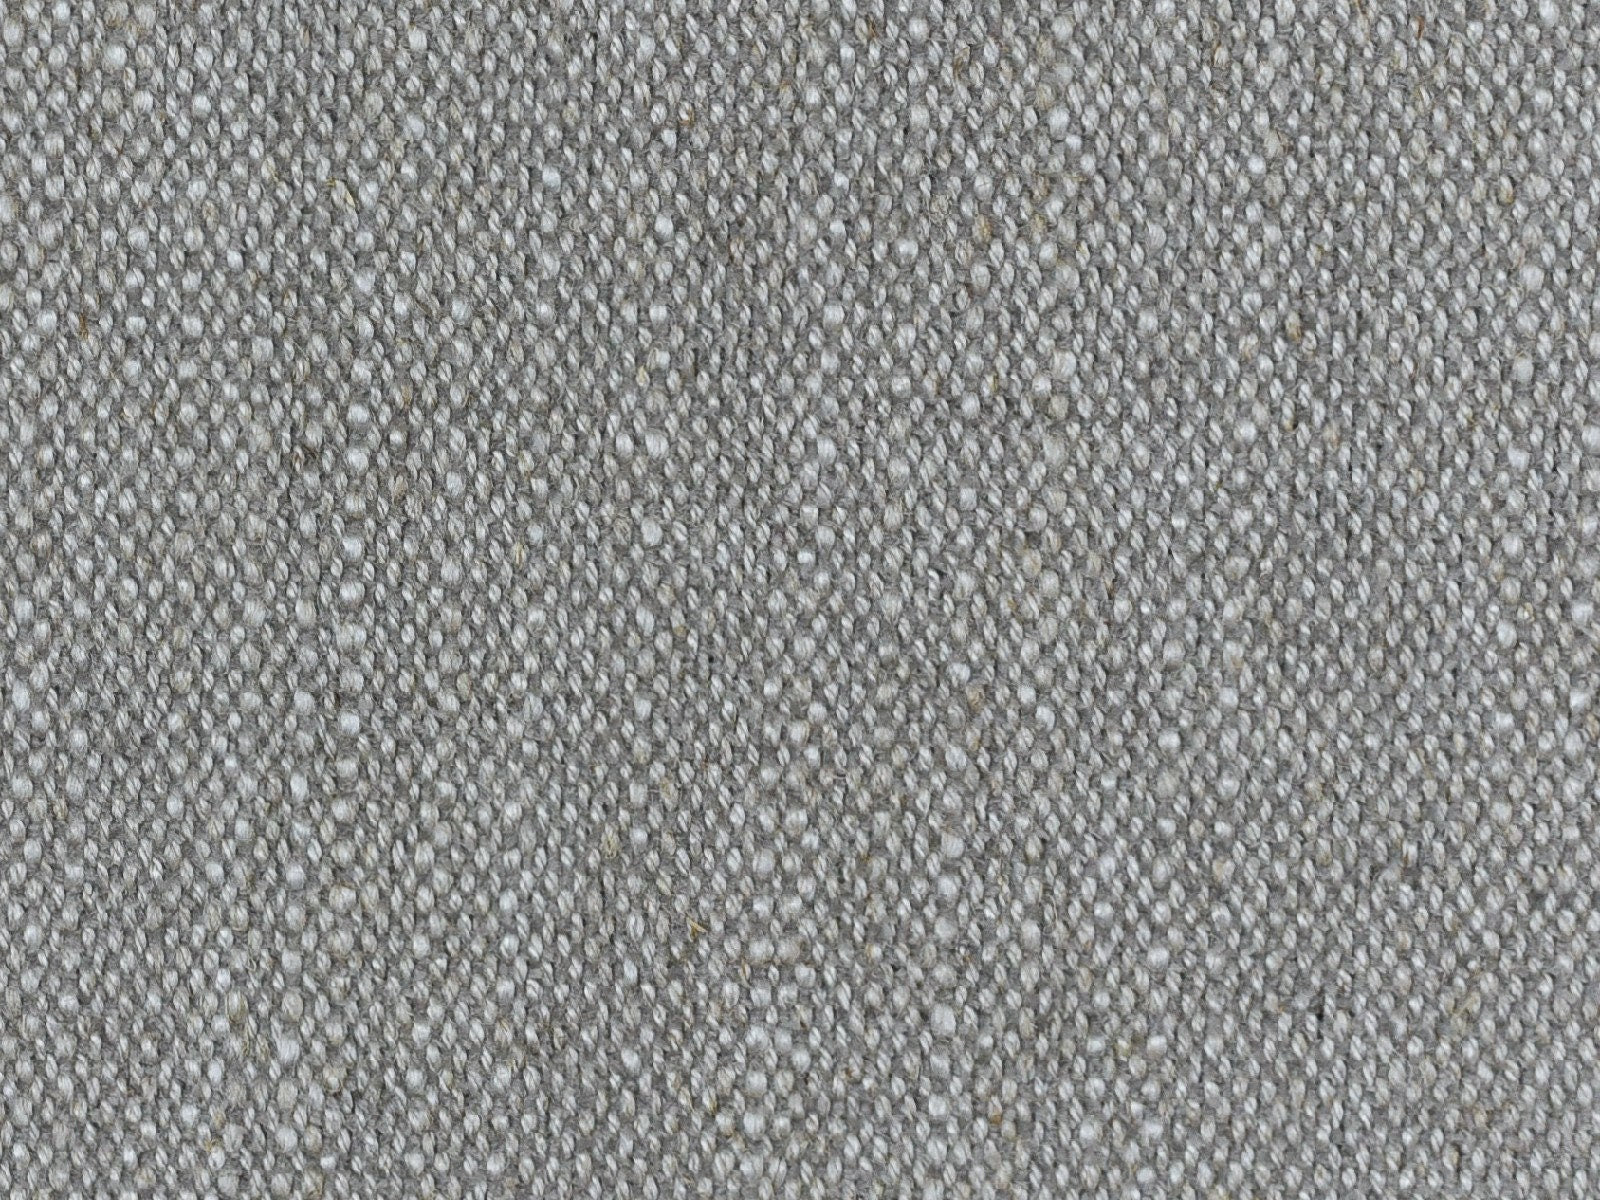 Heavy Duty Elegant Textured Linen Upholstery Fabric By The Yard High Abrasion Fabric For Chair Couch Doeskin